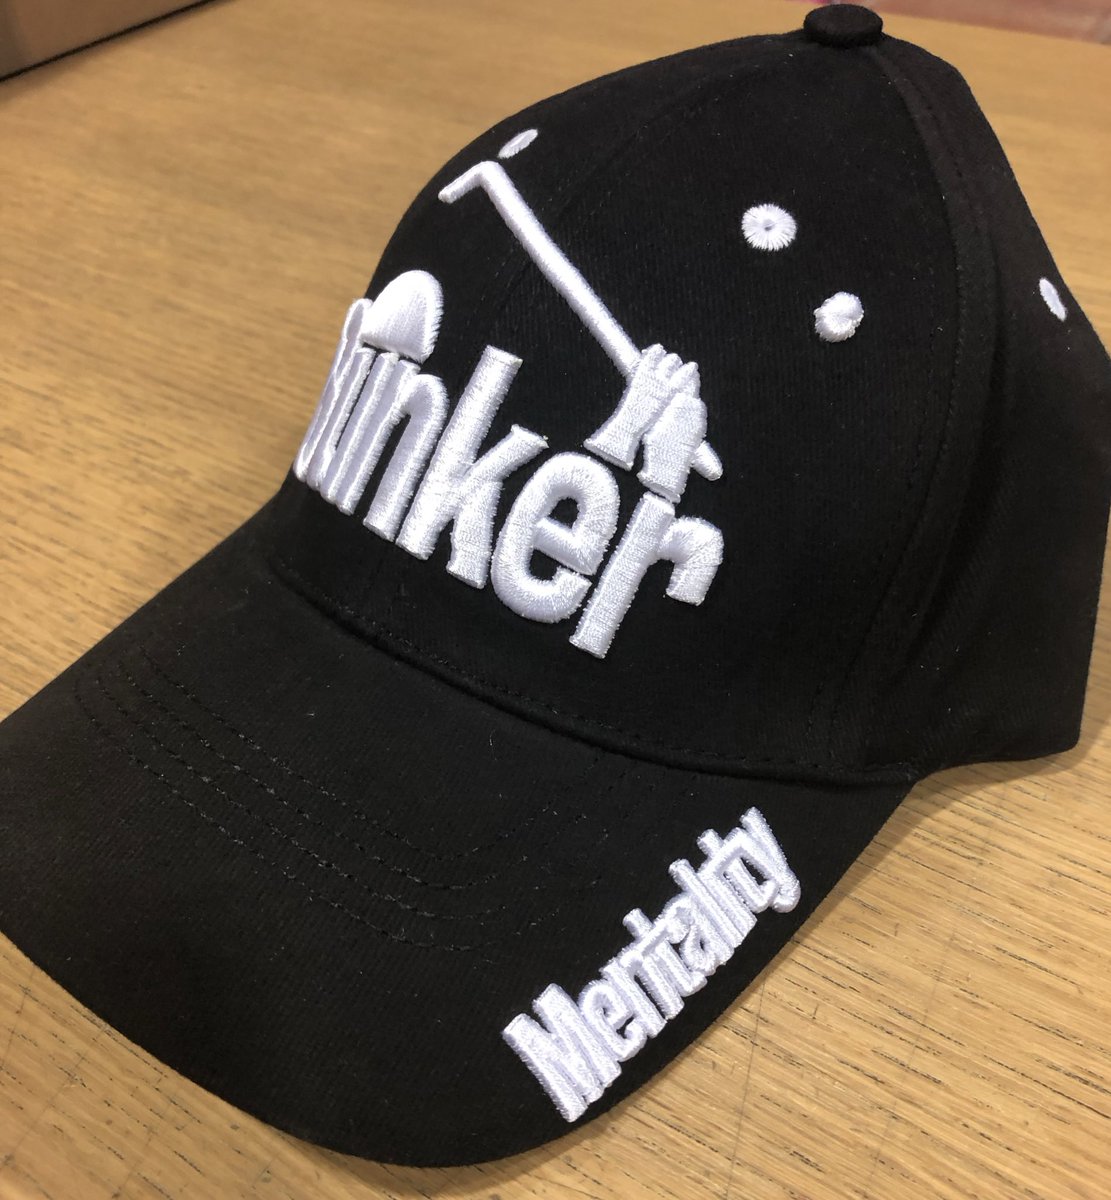 🔥Win It Wednesday 🔥 we’ve got 3 of these great Bunker Mentality logo caps to giveaway, all you need to do is like and retweet to be in with a chance of winning. Competition closes at 1pm tomorrow (9th April) #stylematters #bunkermentality #teambunker #golf #golfgiveaway